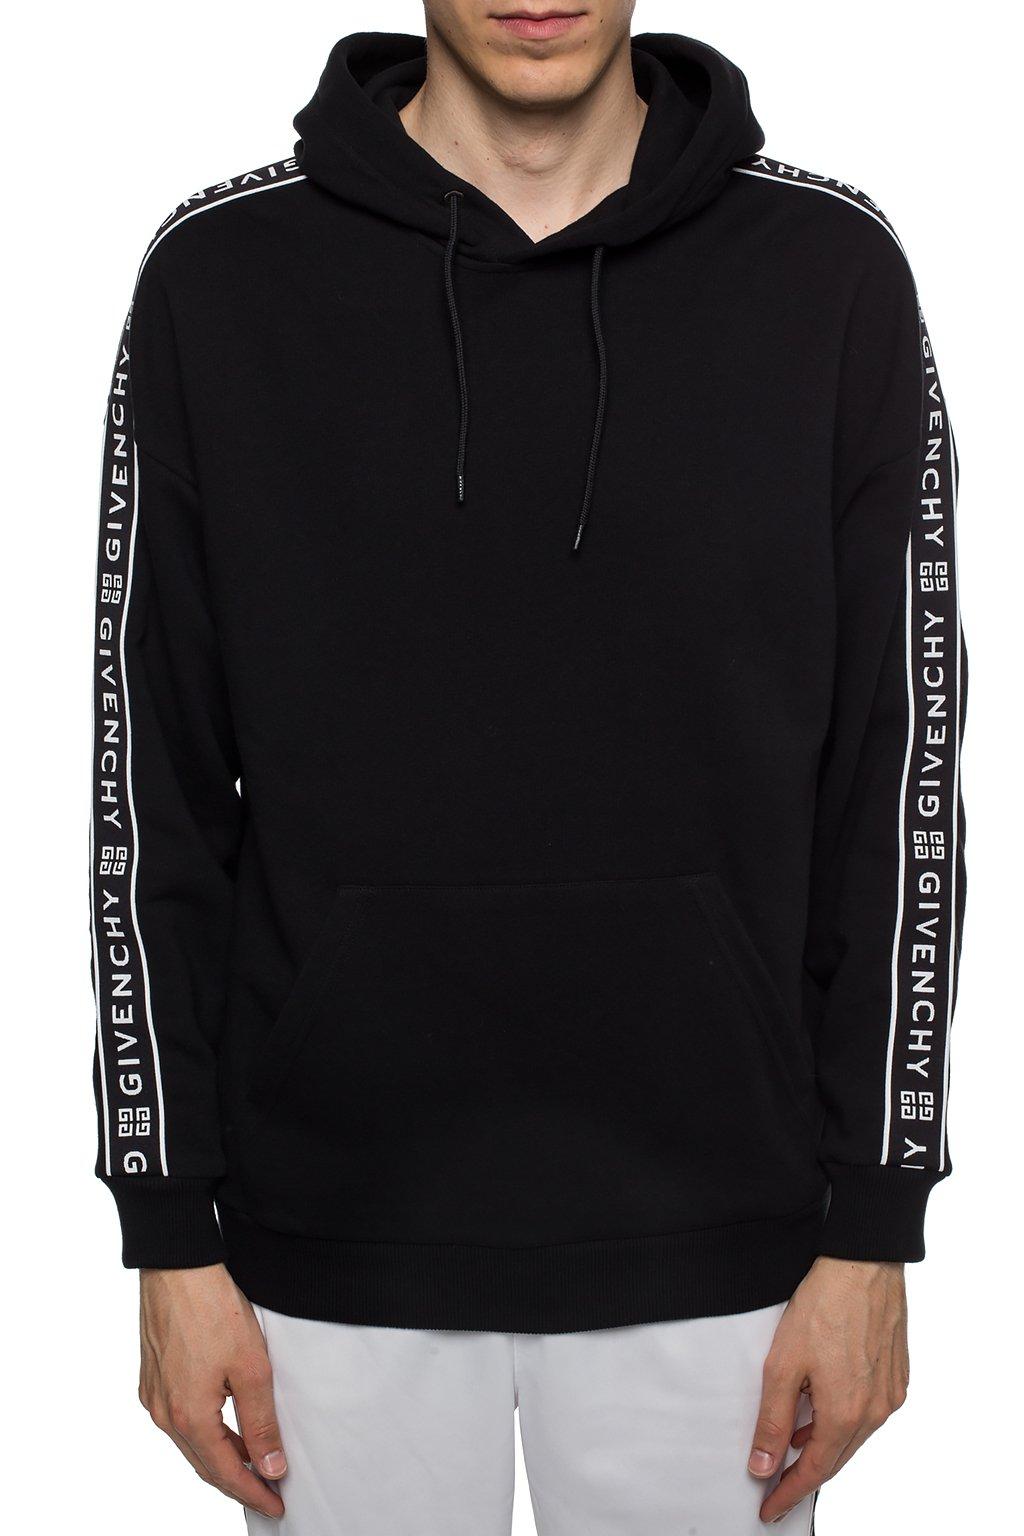 givenchy 4g hoodie